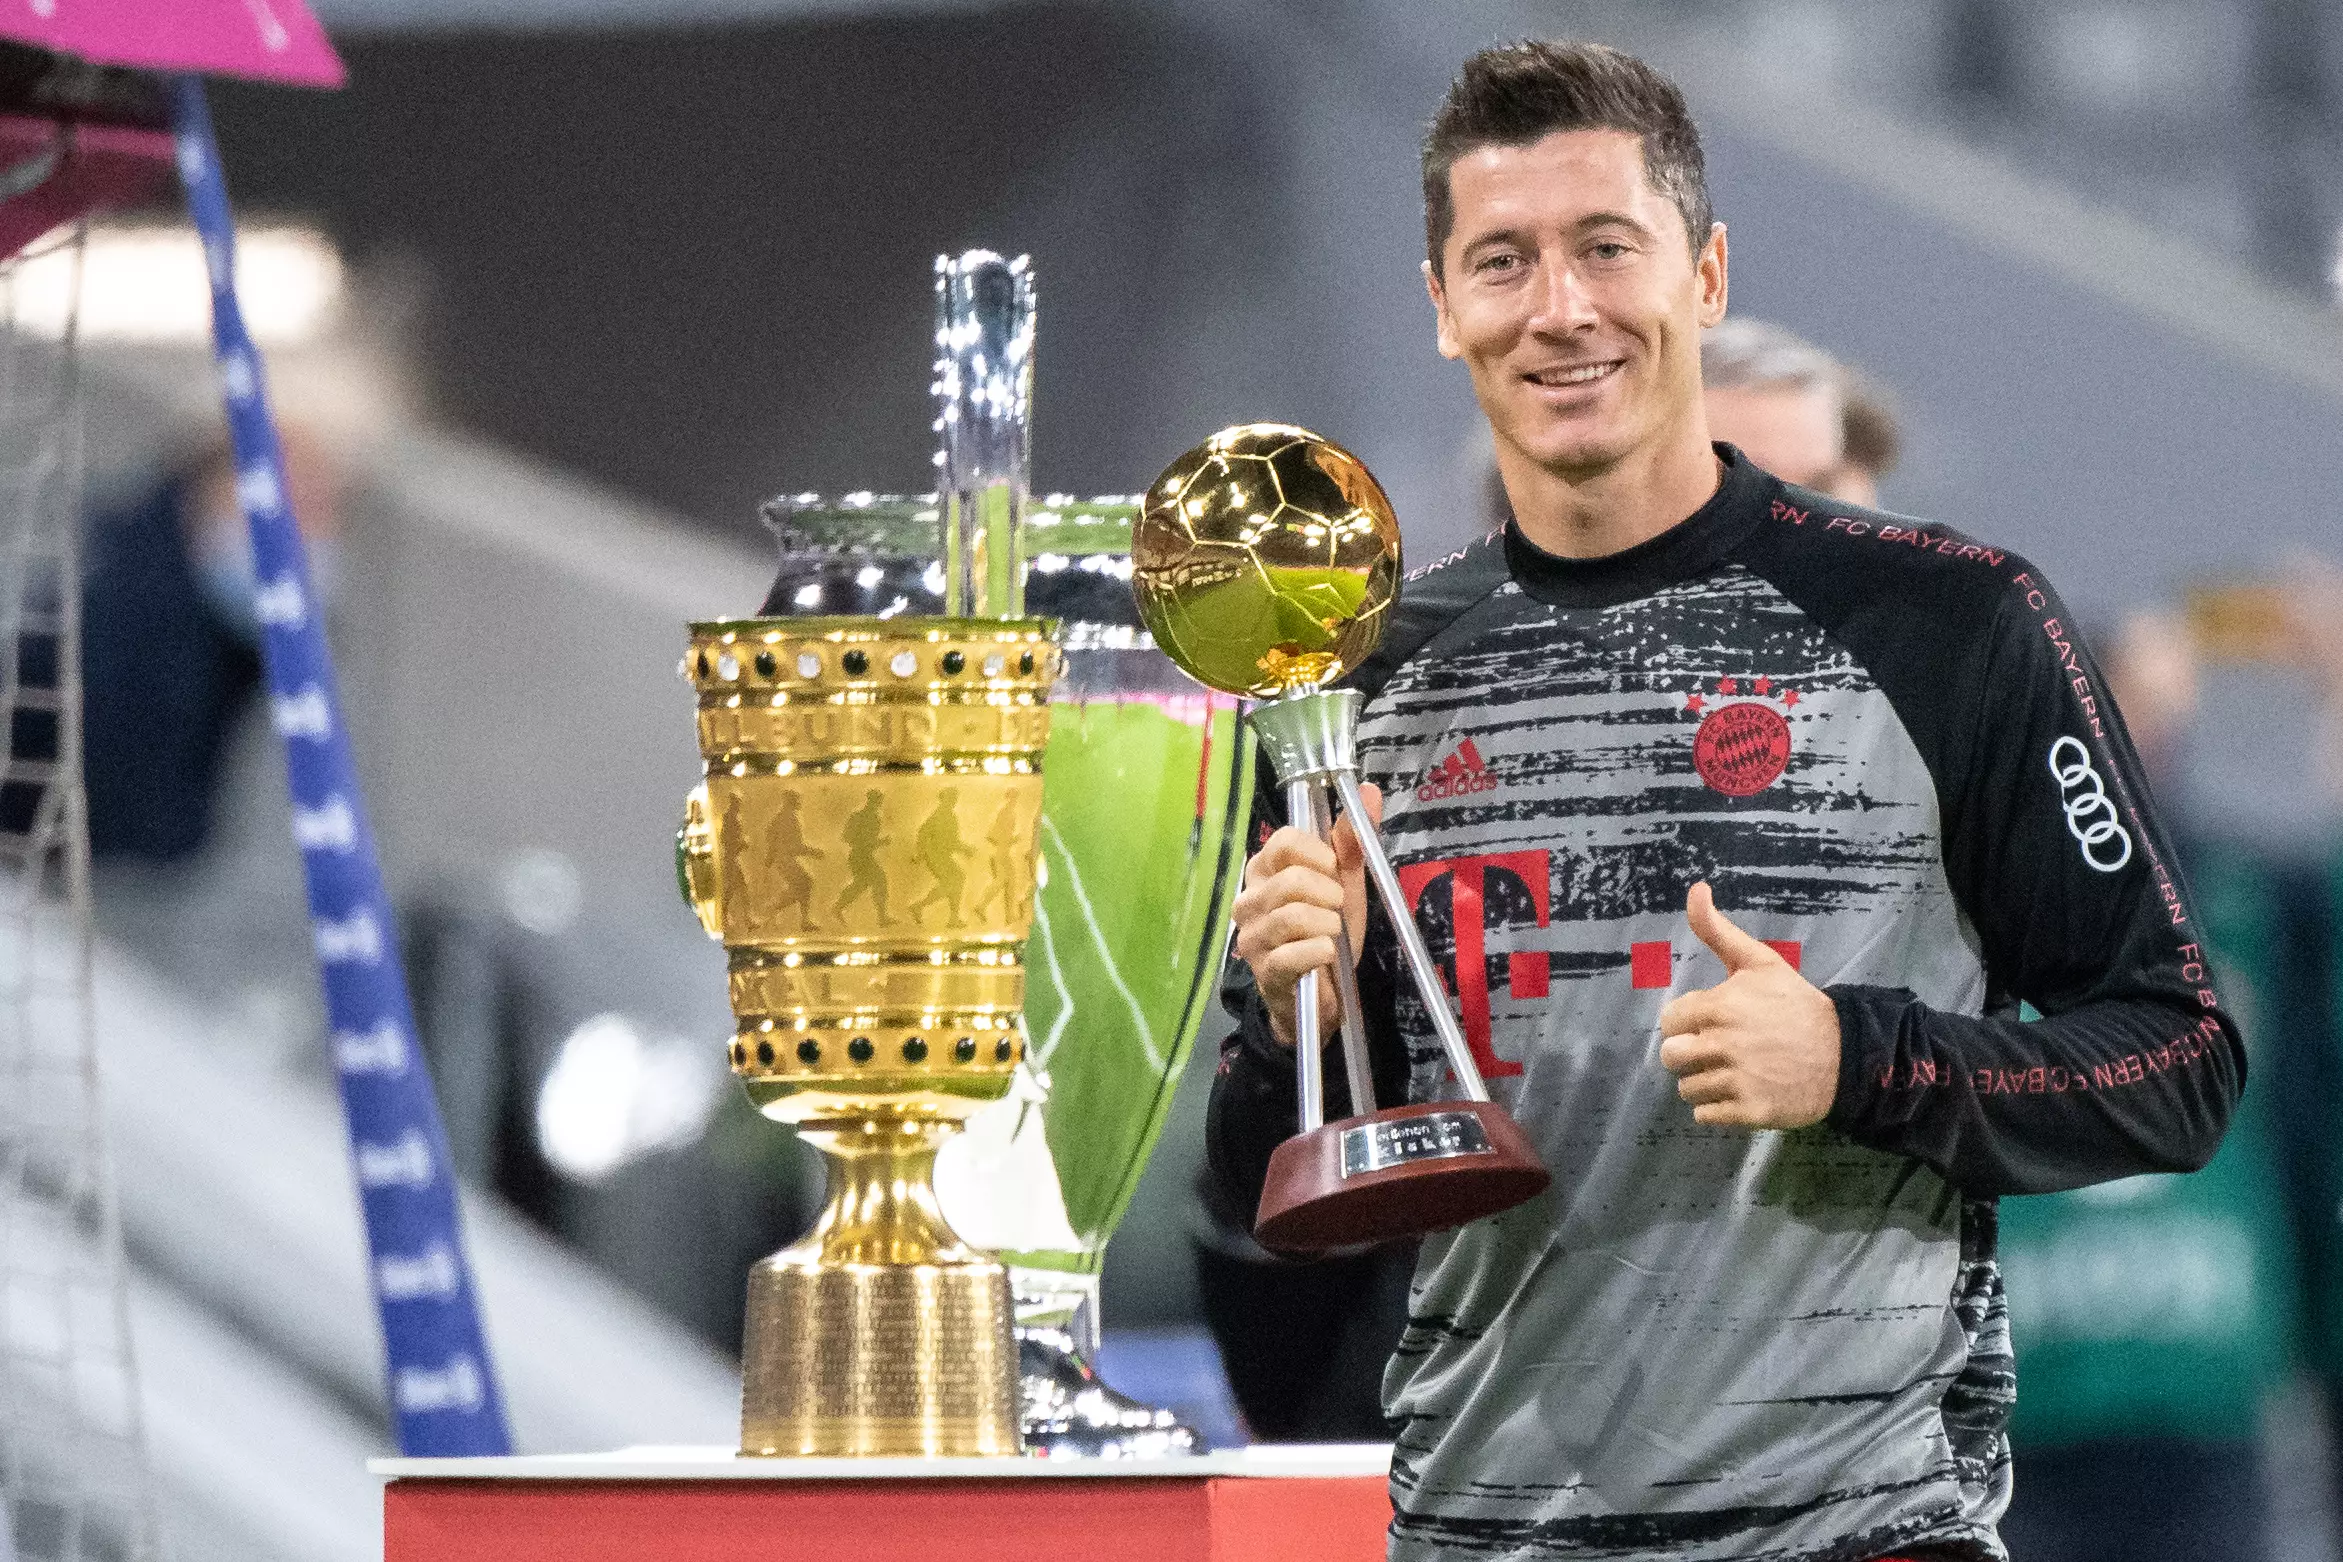 Lewandowski's picked up lots of silverware this year. Image: PA Images